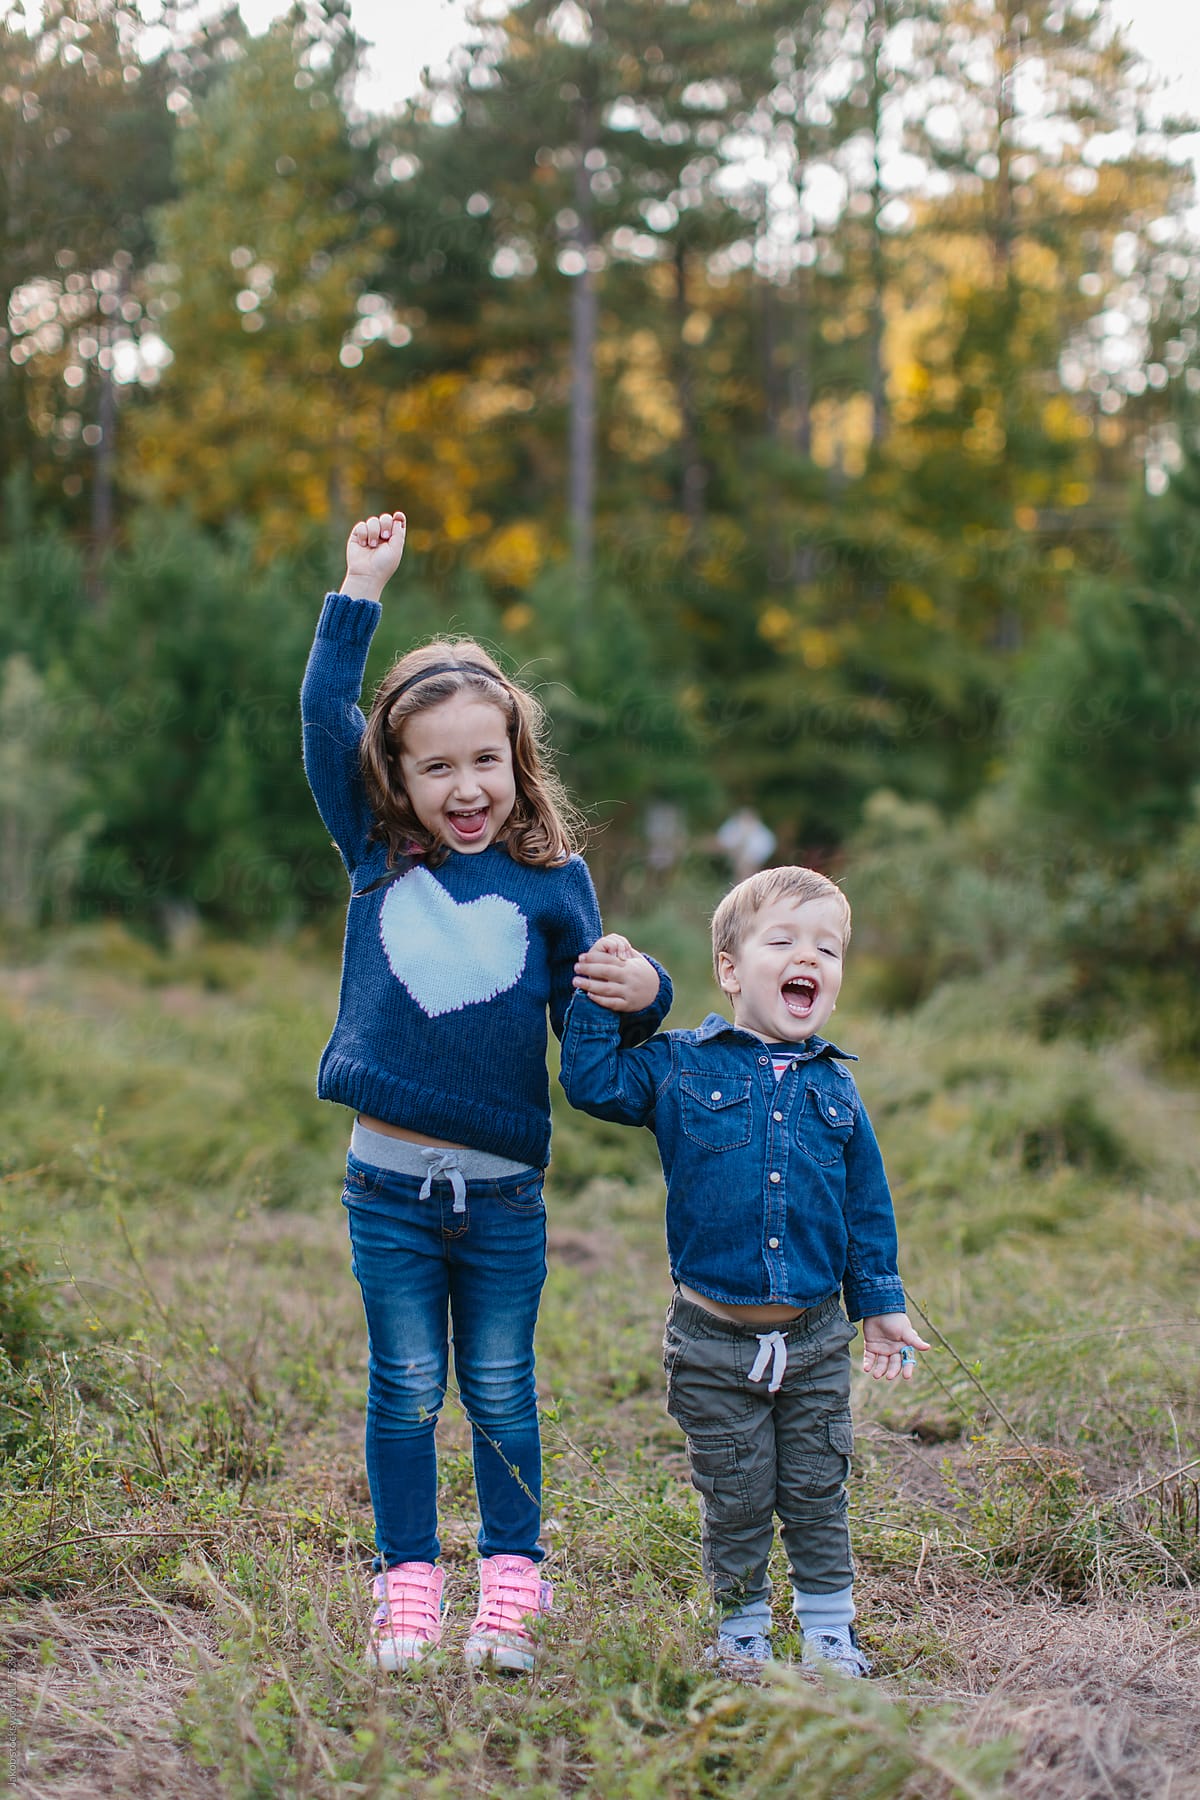 Adorable Siblings Hugging Each Other by Stocksy Contributor Jakob  Lagerstedt - Stocksy